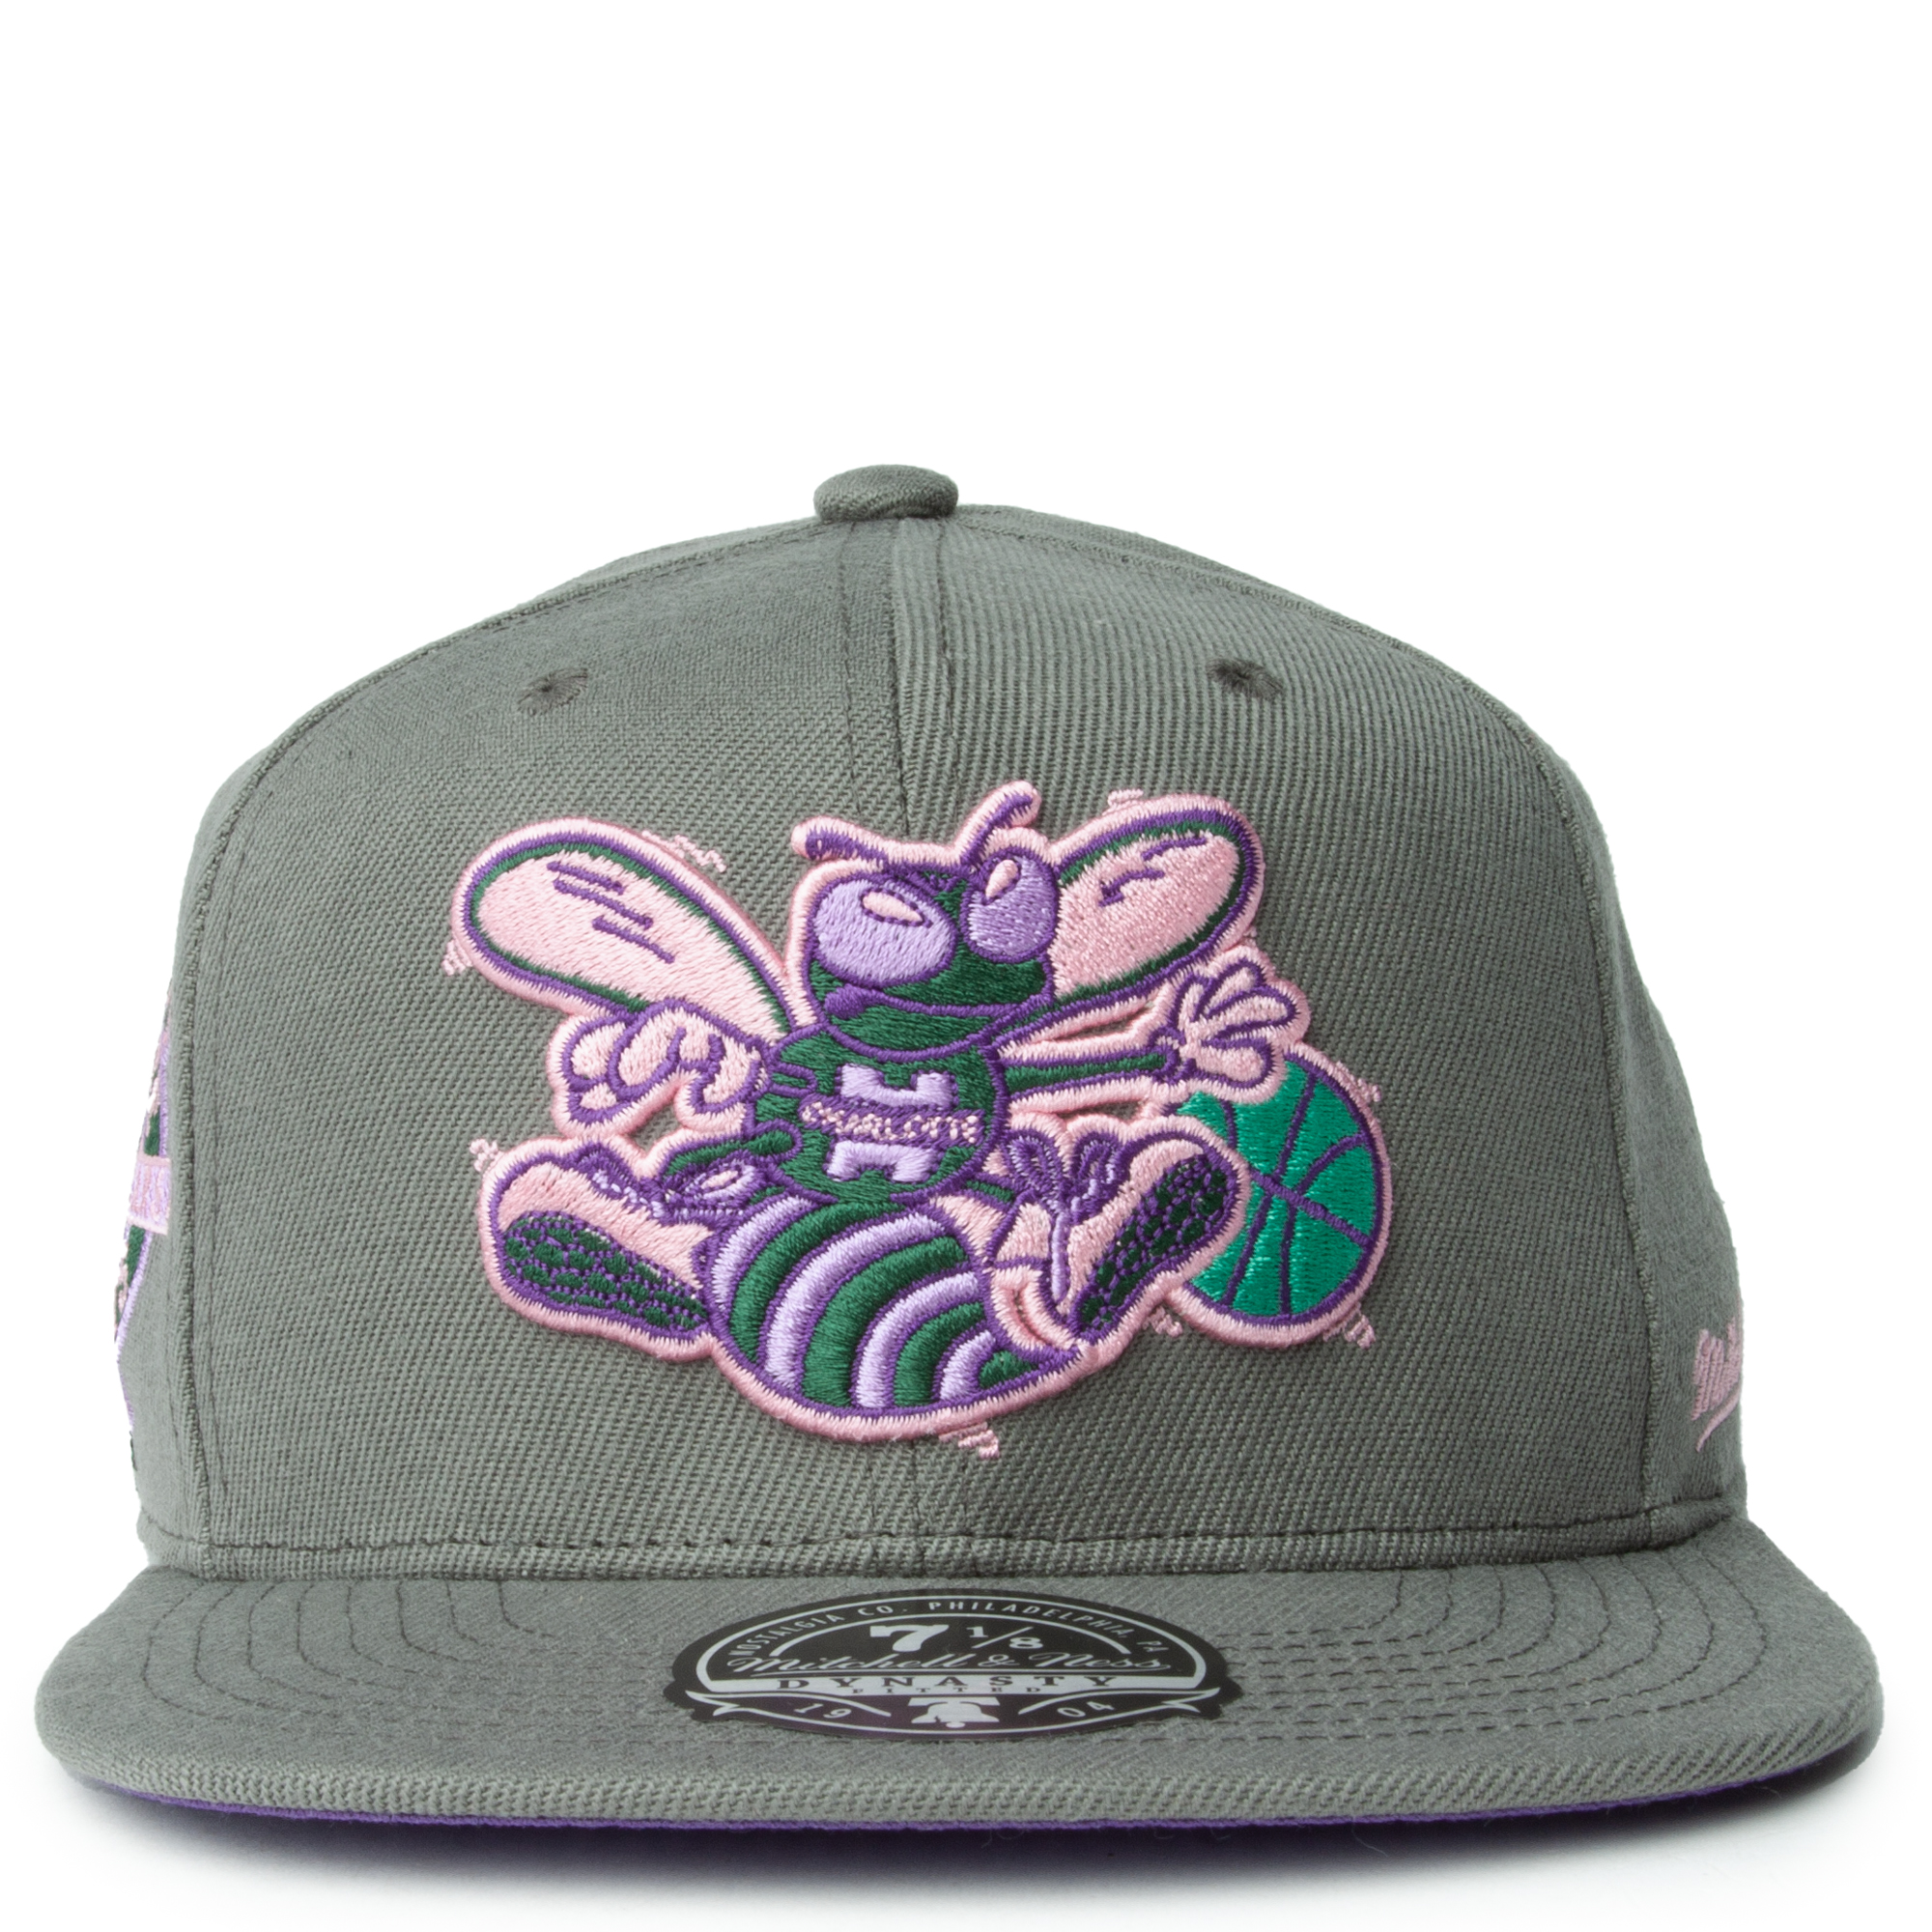 hornets mitchell and ness snapback